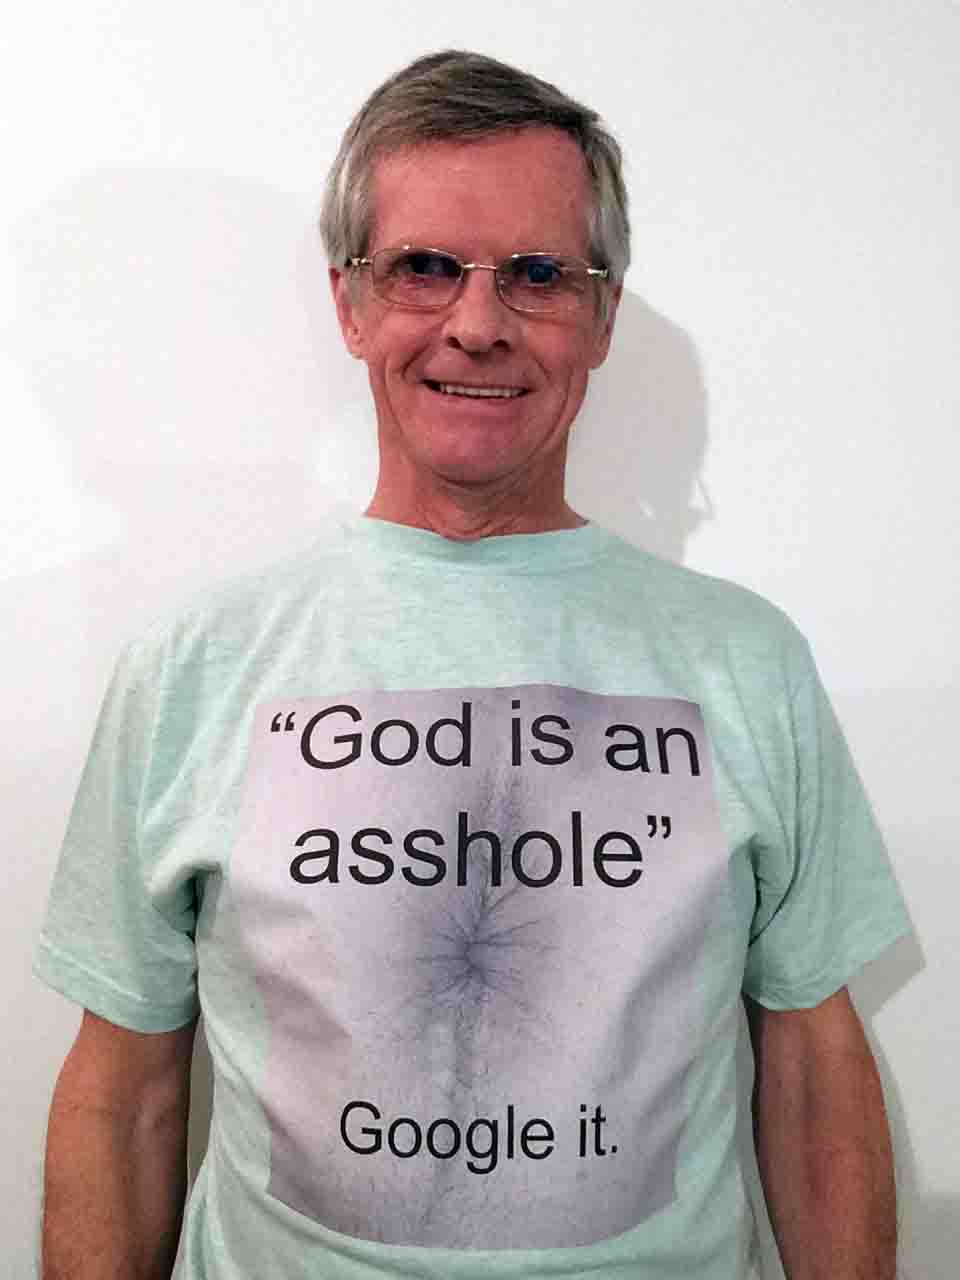 Darwin Bedford wearing his shirt that says 'God is an asshole, Google it.'